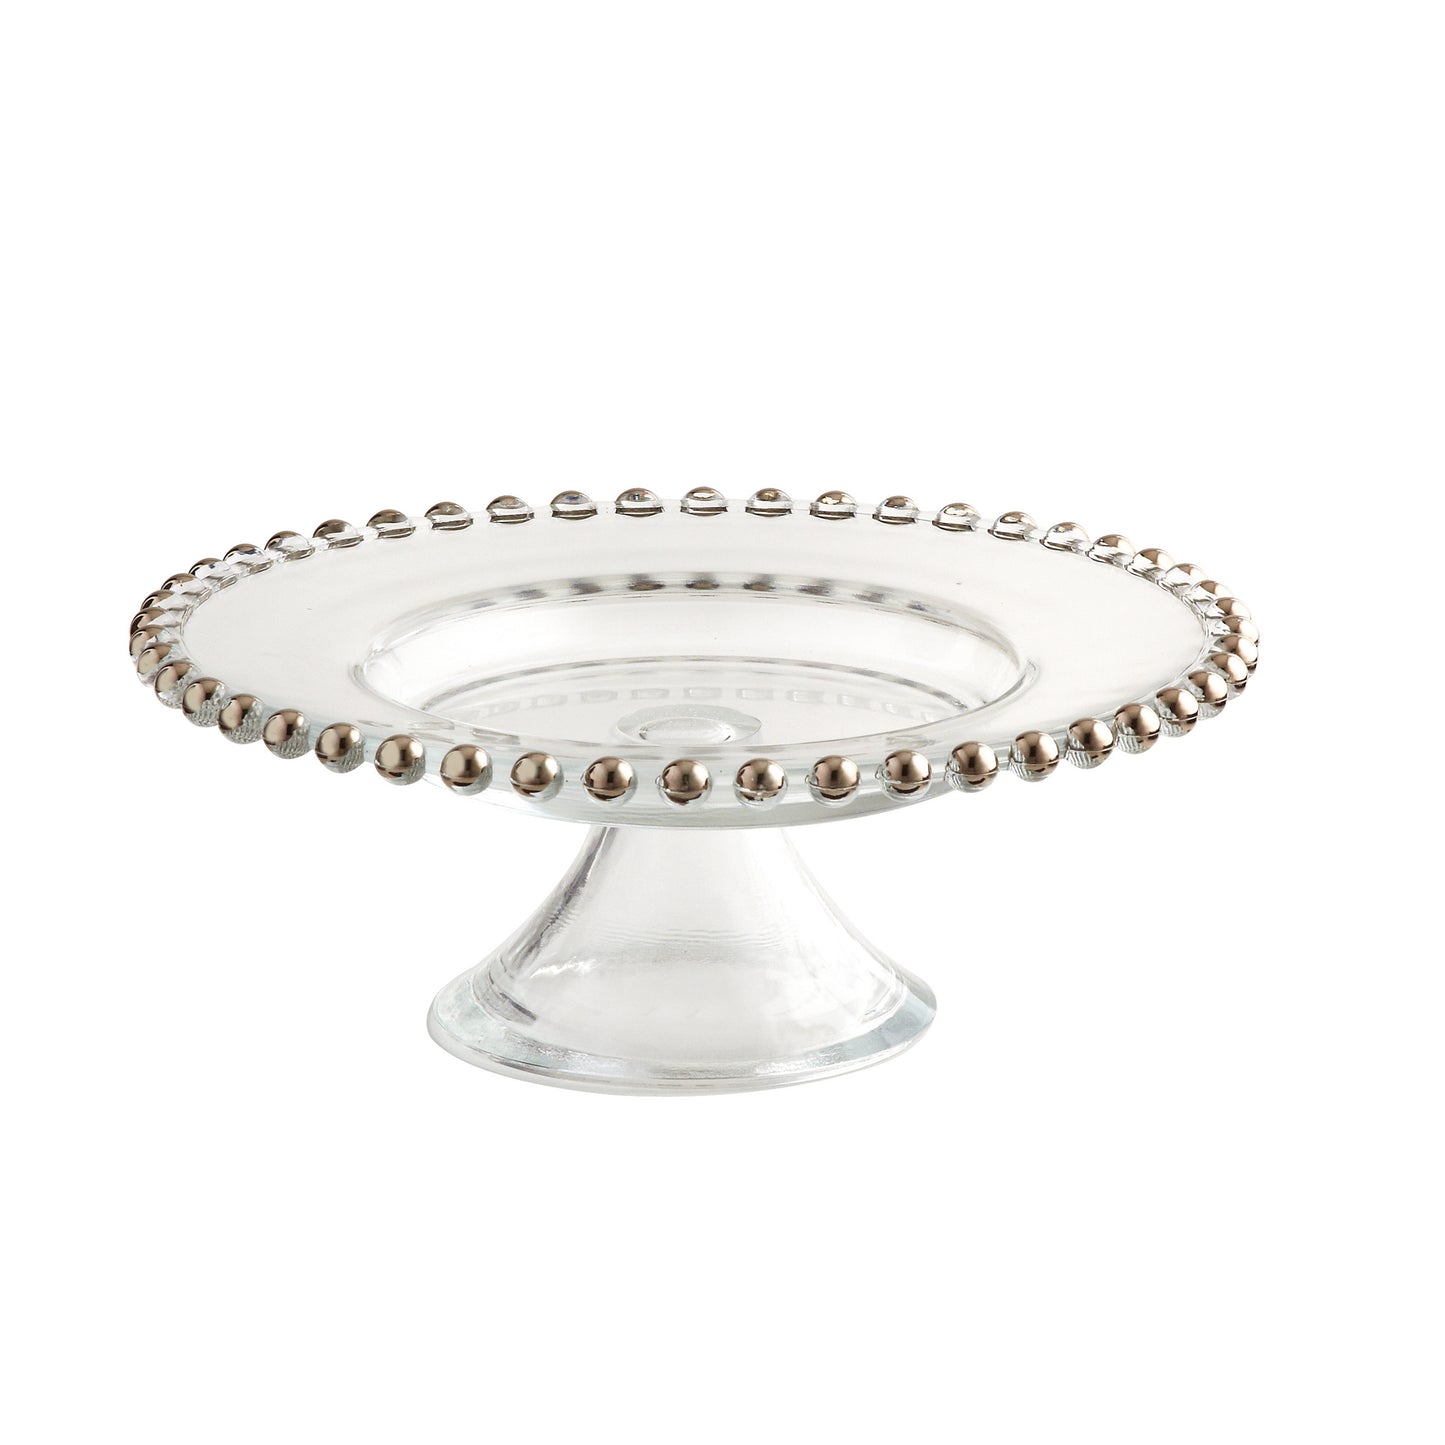 Leeber Silver Bead Footed Serving Plate, 8"